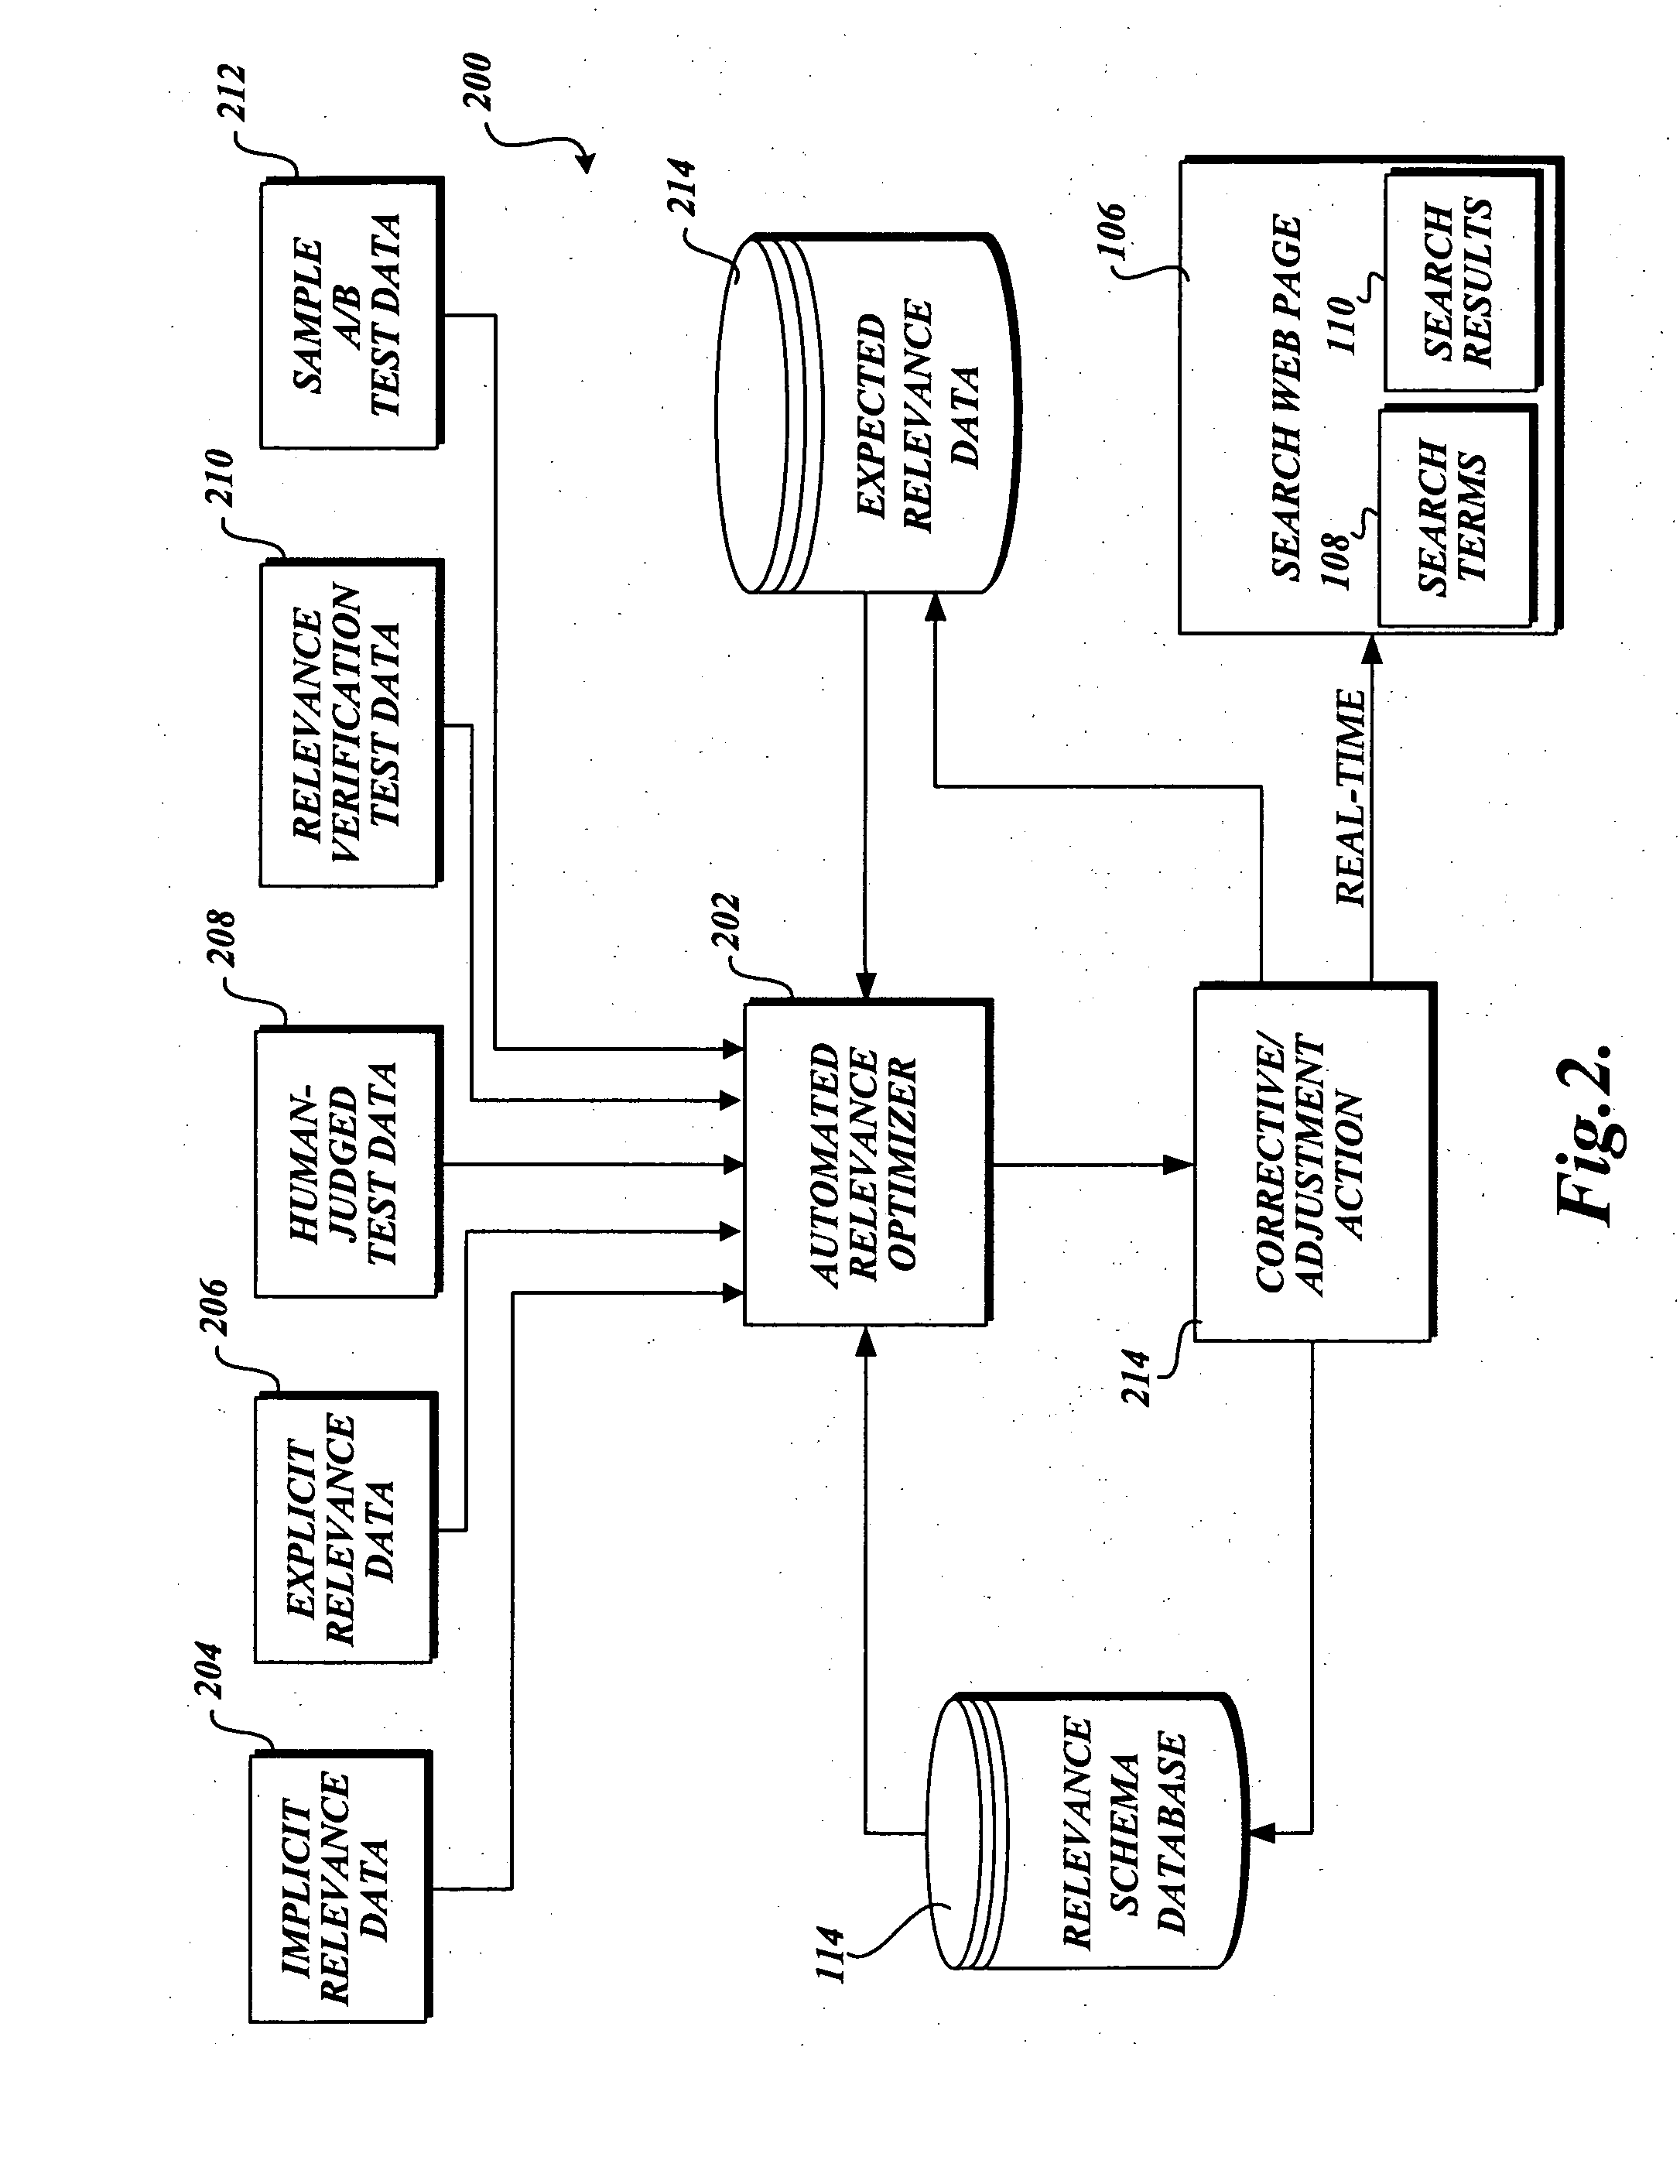 System and method for automated optimization of search result relevance